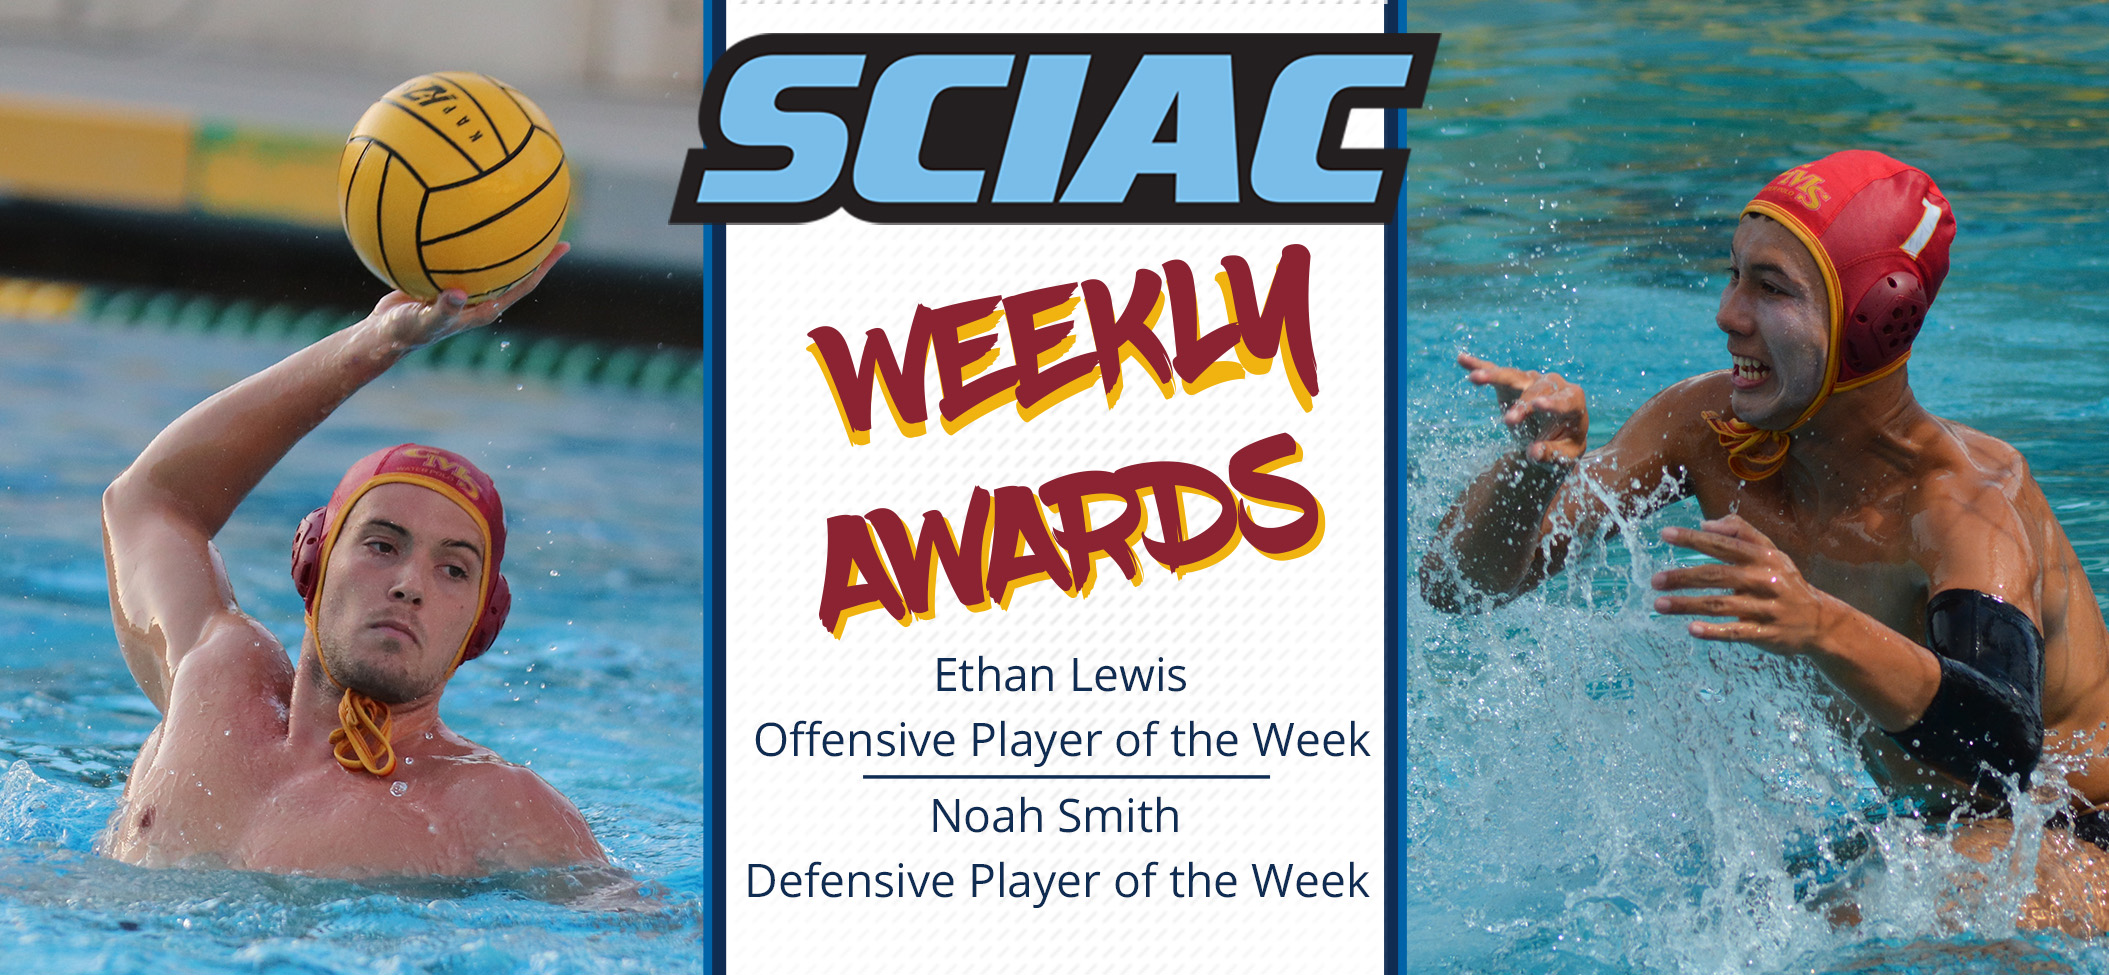 SCIAC winners Ethan Lewis (left) and Noah Smith (right)